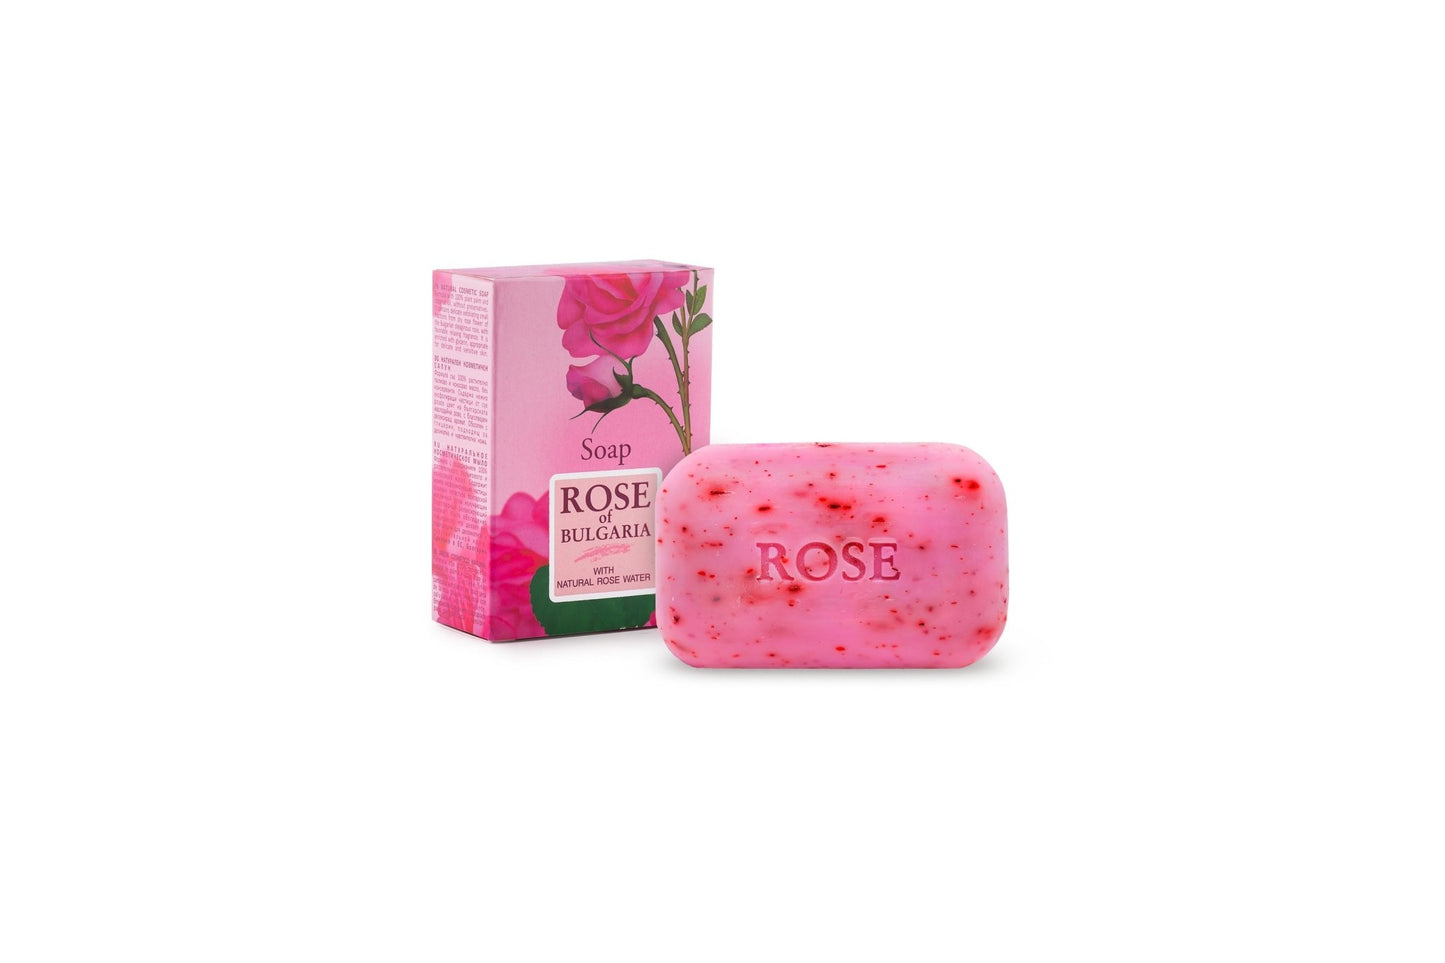 Natural Soap with rose water Rose of Bulgaria Biofresh - 40g. - Adrasse Cosmetics